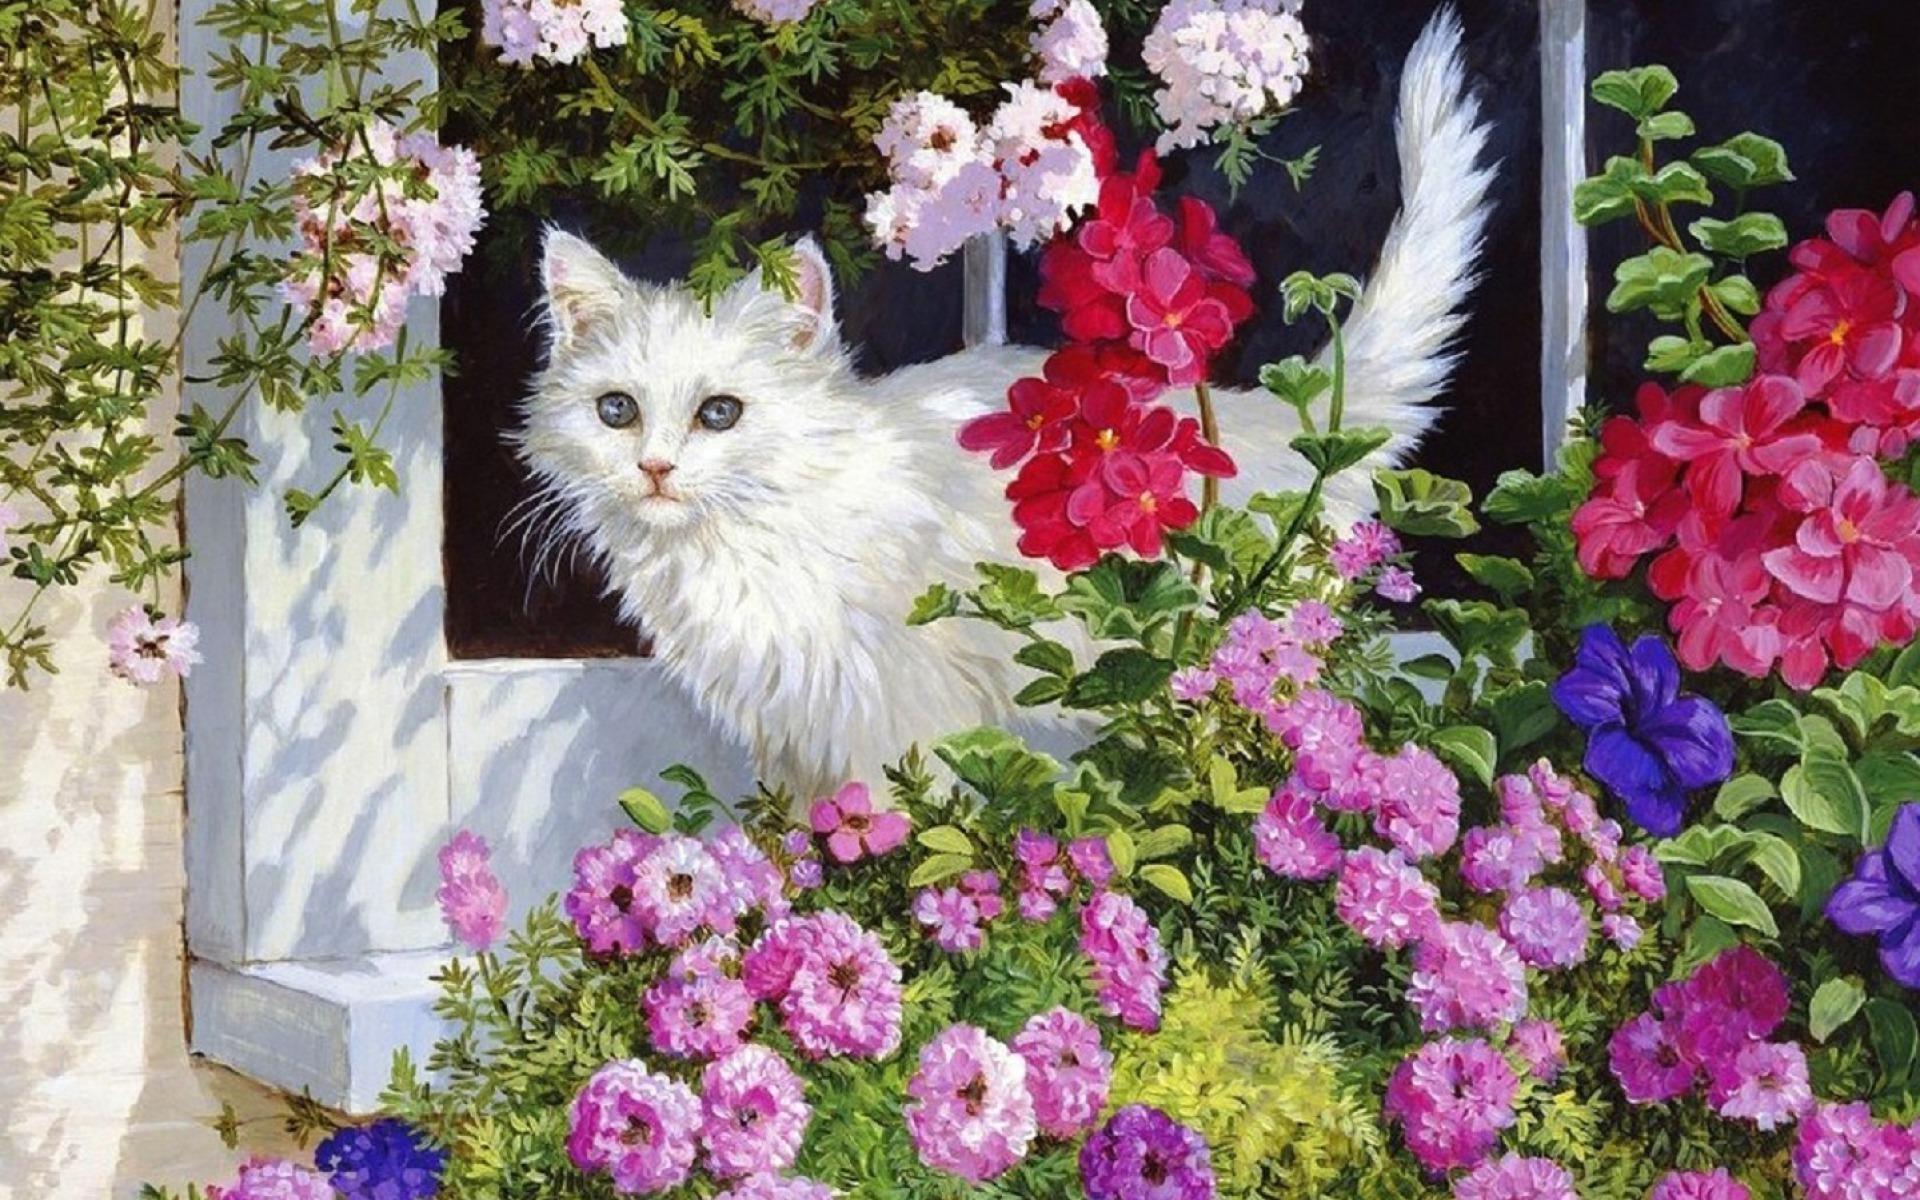 relaxing wallpapers hd flowers cat